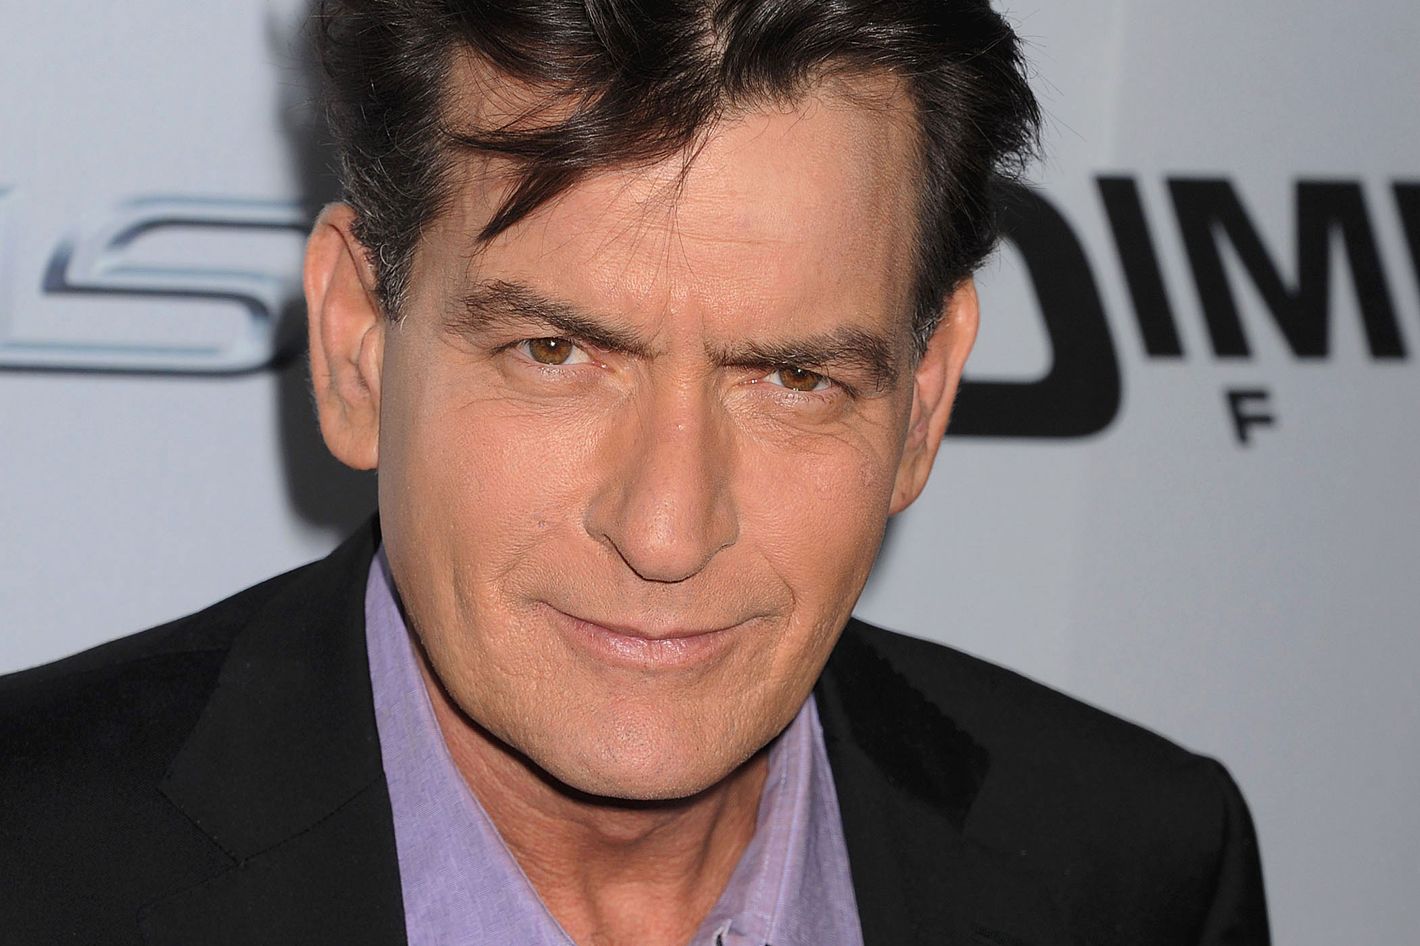 Charlie Sheen Is Set to Reveal He's HIV Positive on the Today Show